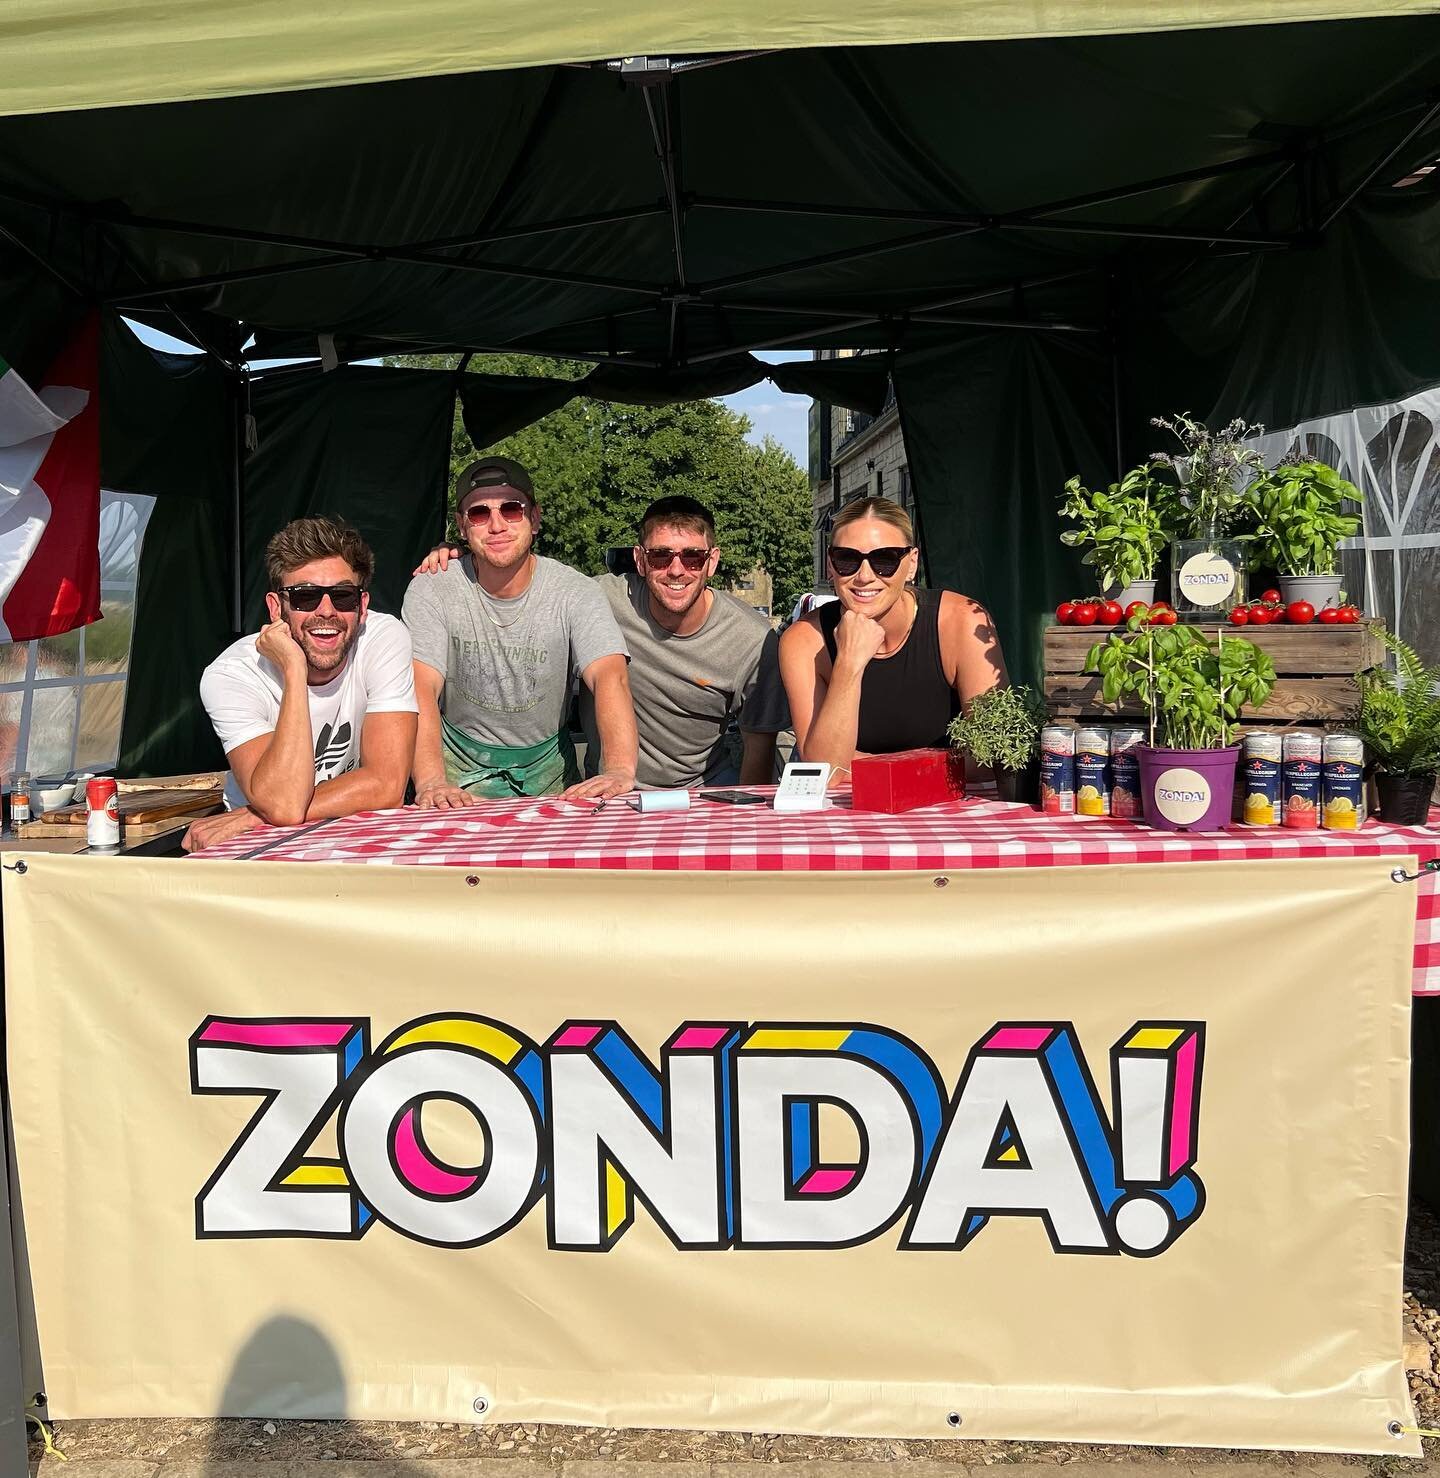 &bull;Zonda&rsquo;s opening weekend is a wrap!&bull;
_________________________________________
I am utterly overwhelmed by the support and response to our new business. There are so many people to thank for helping me get this off the ground, but som